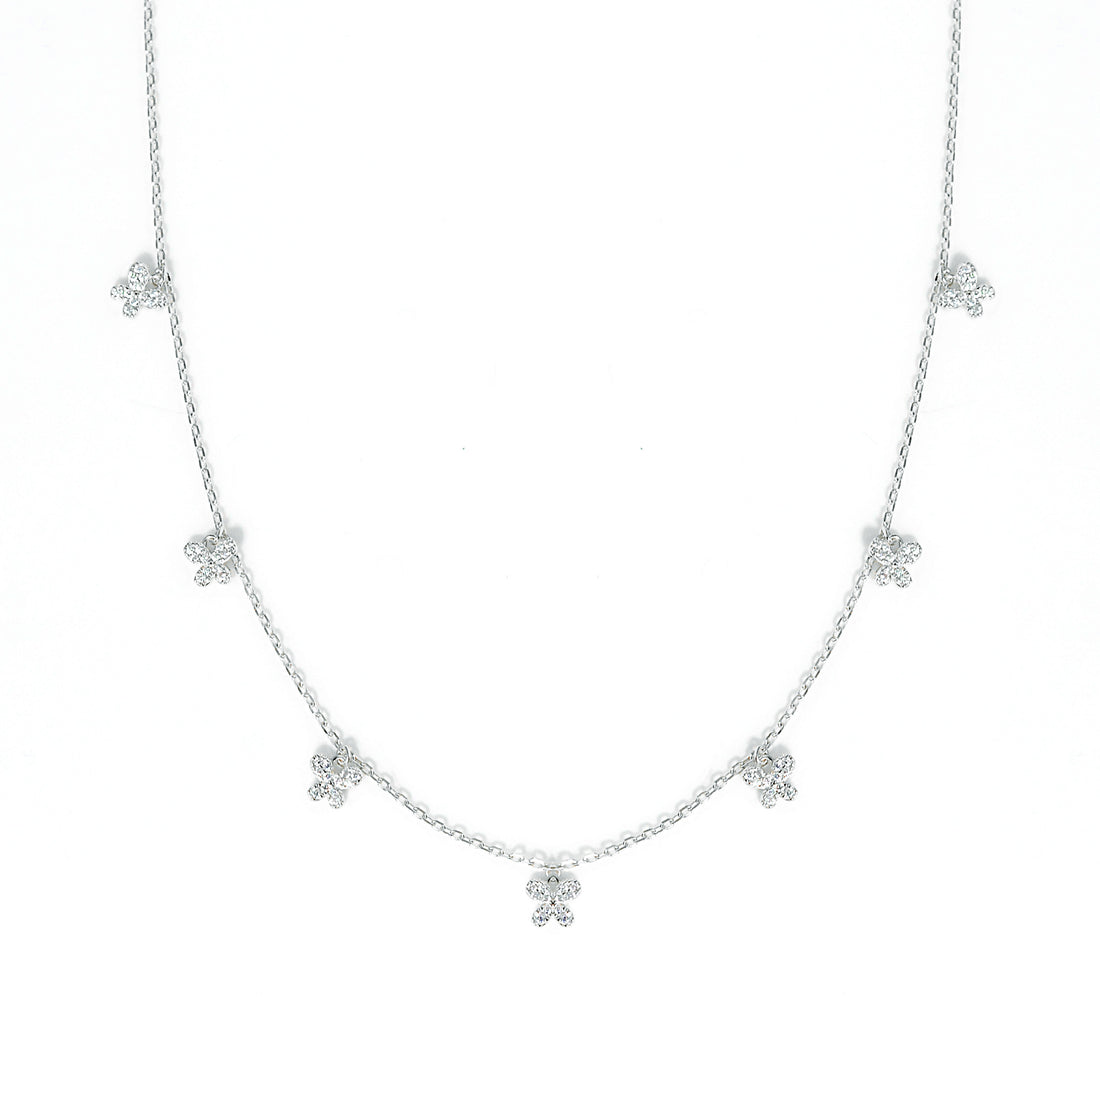 Dolce Mondo Silver Zircon Necklace: Elegant Charm Butterfly Accents and High-Quality Cubic Zirconia